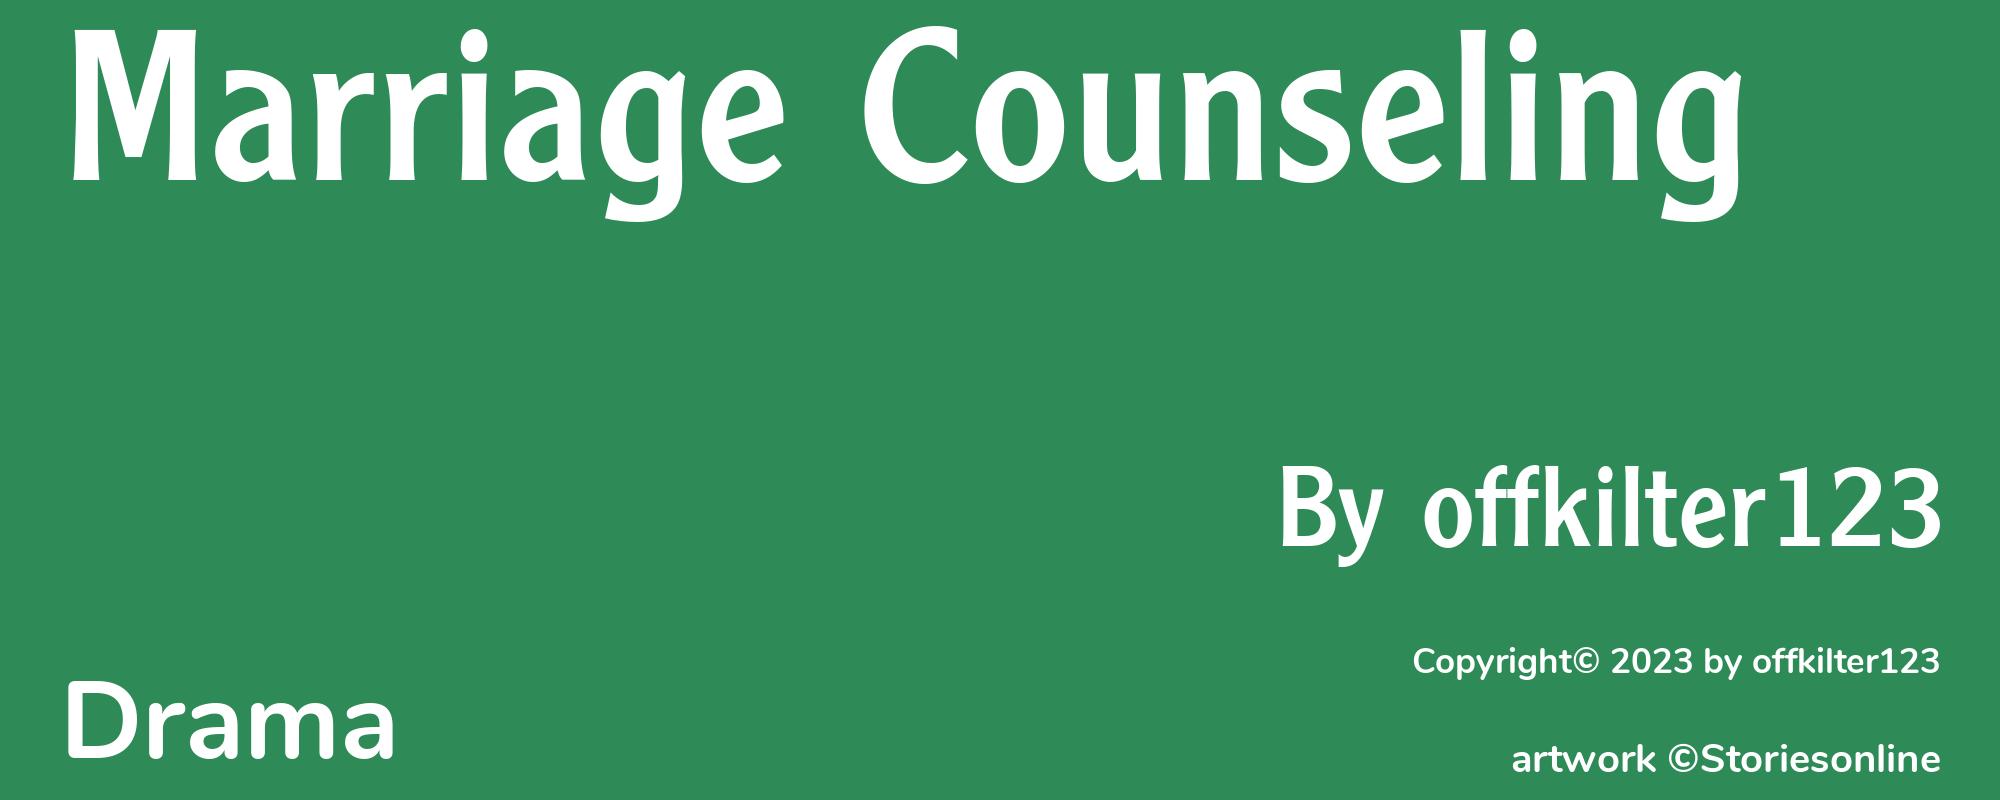 Marriage Counseling - Cover